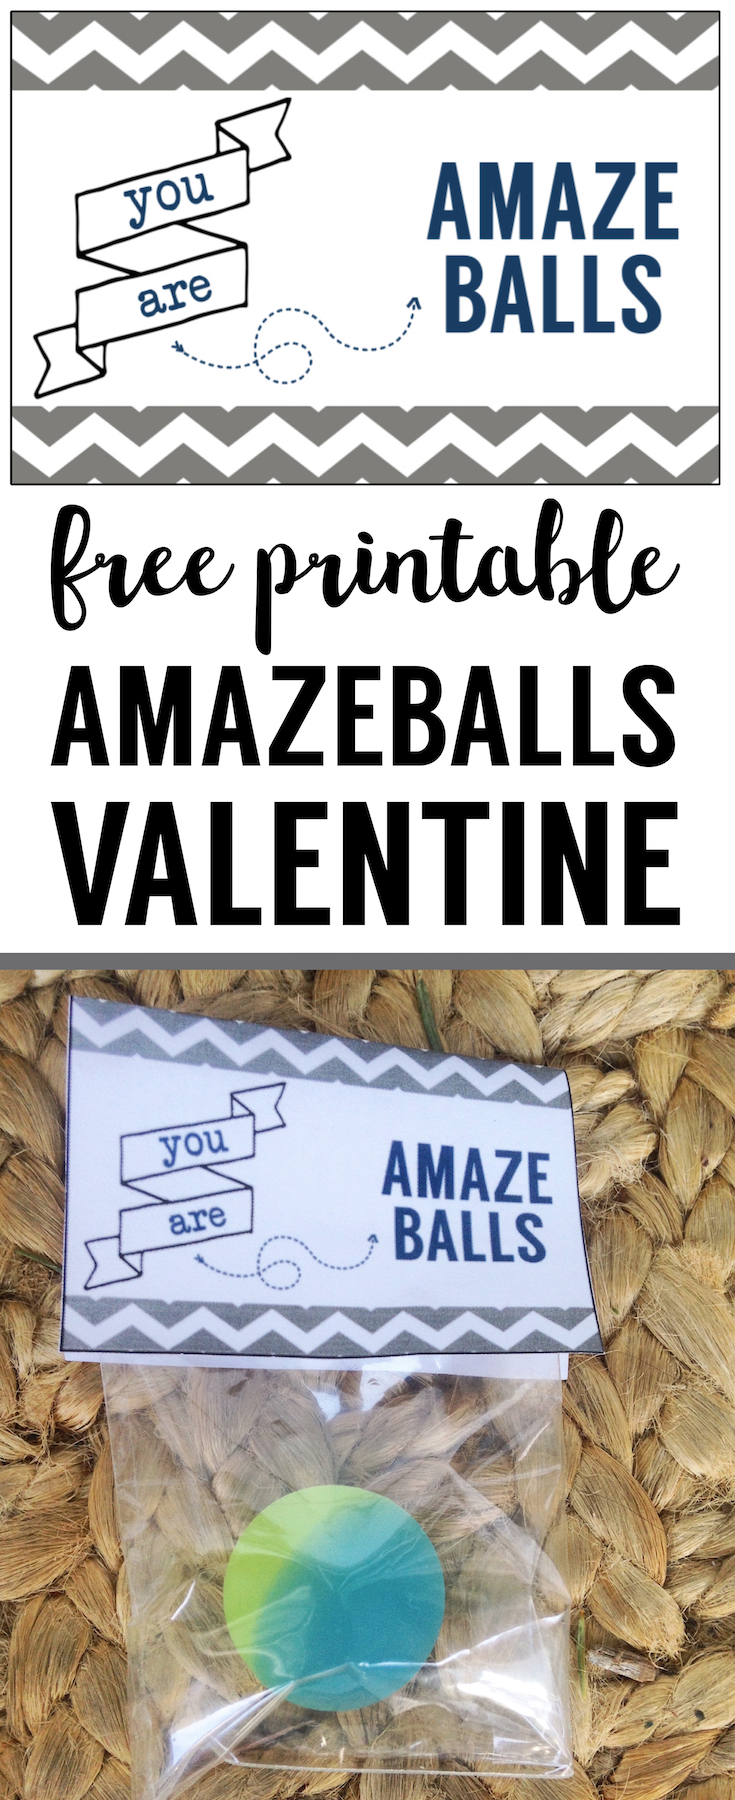 Amazeballs bouncy ball valentine printable. This DIY free printable bouncy ball valentine is an easy valentine for kids to give out this Valentine's Day. 